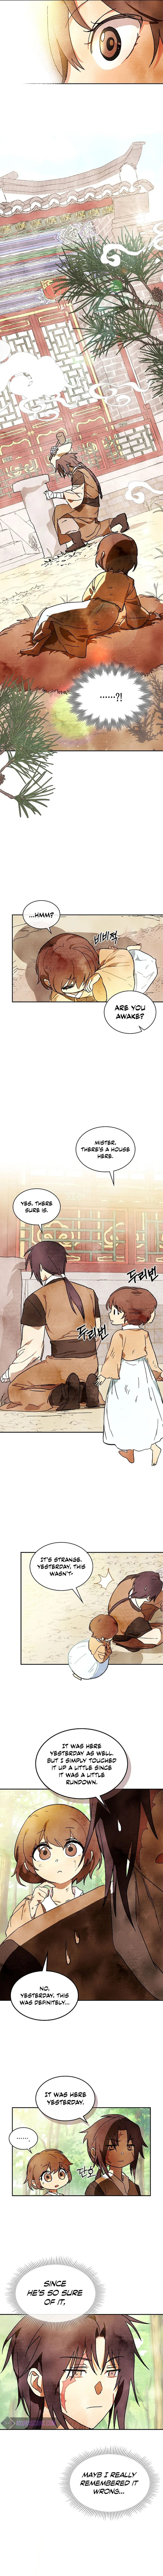 chronicles-of-the-martial-gods-return-chap-3-1